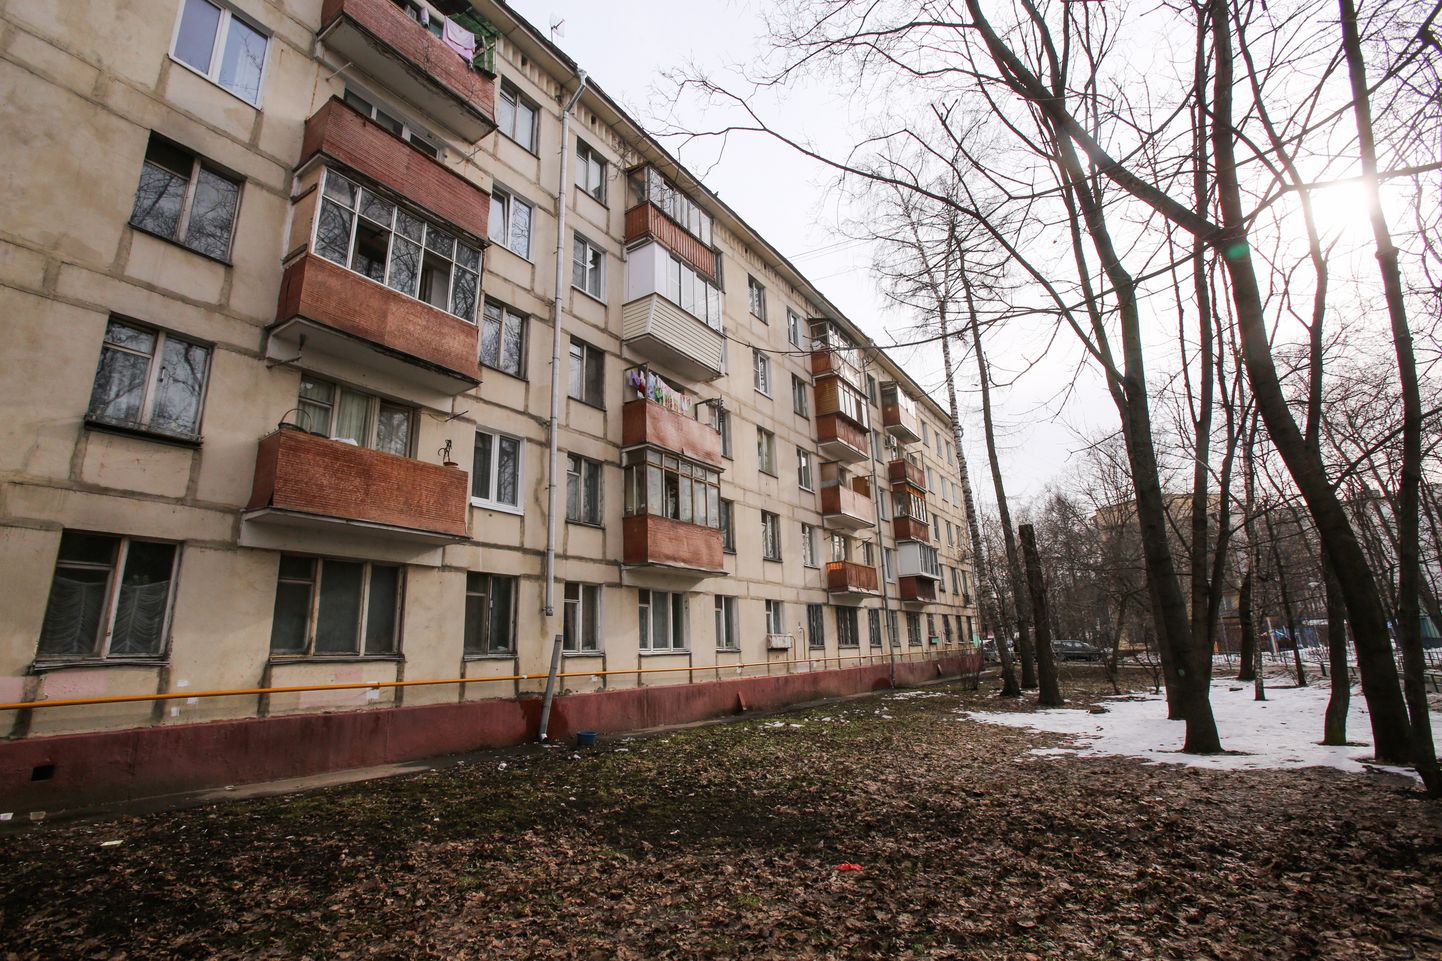 MOSCOW, RUSSIA - FEBRUARY 28, 2017: A five-storey residential building, a Khrushchyovka, developed in the 1950s when Nikita Khrushchev was in power in the USSR, in a street in Moscow. Russian President Vladimir Putin has asked Moscow Mayor Sergei Sobyanin to demolish all Khrushchyovka buildings in Moscow. Andrei Makhonin/TASS